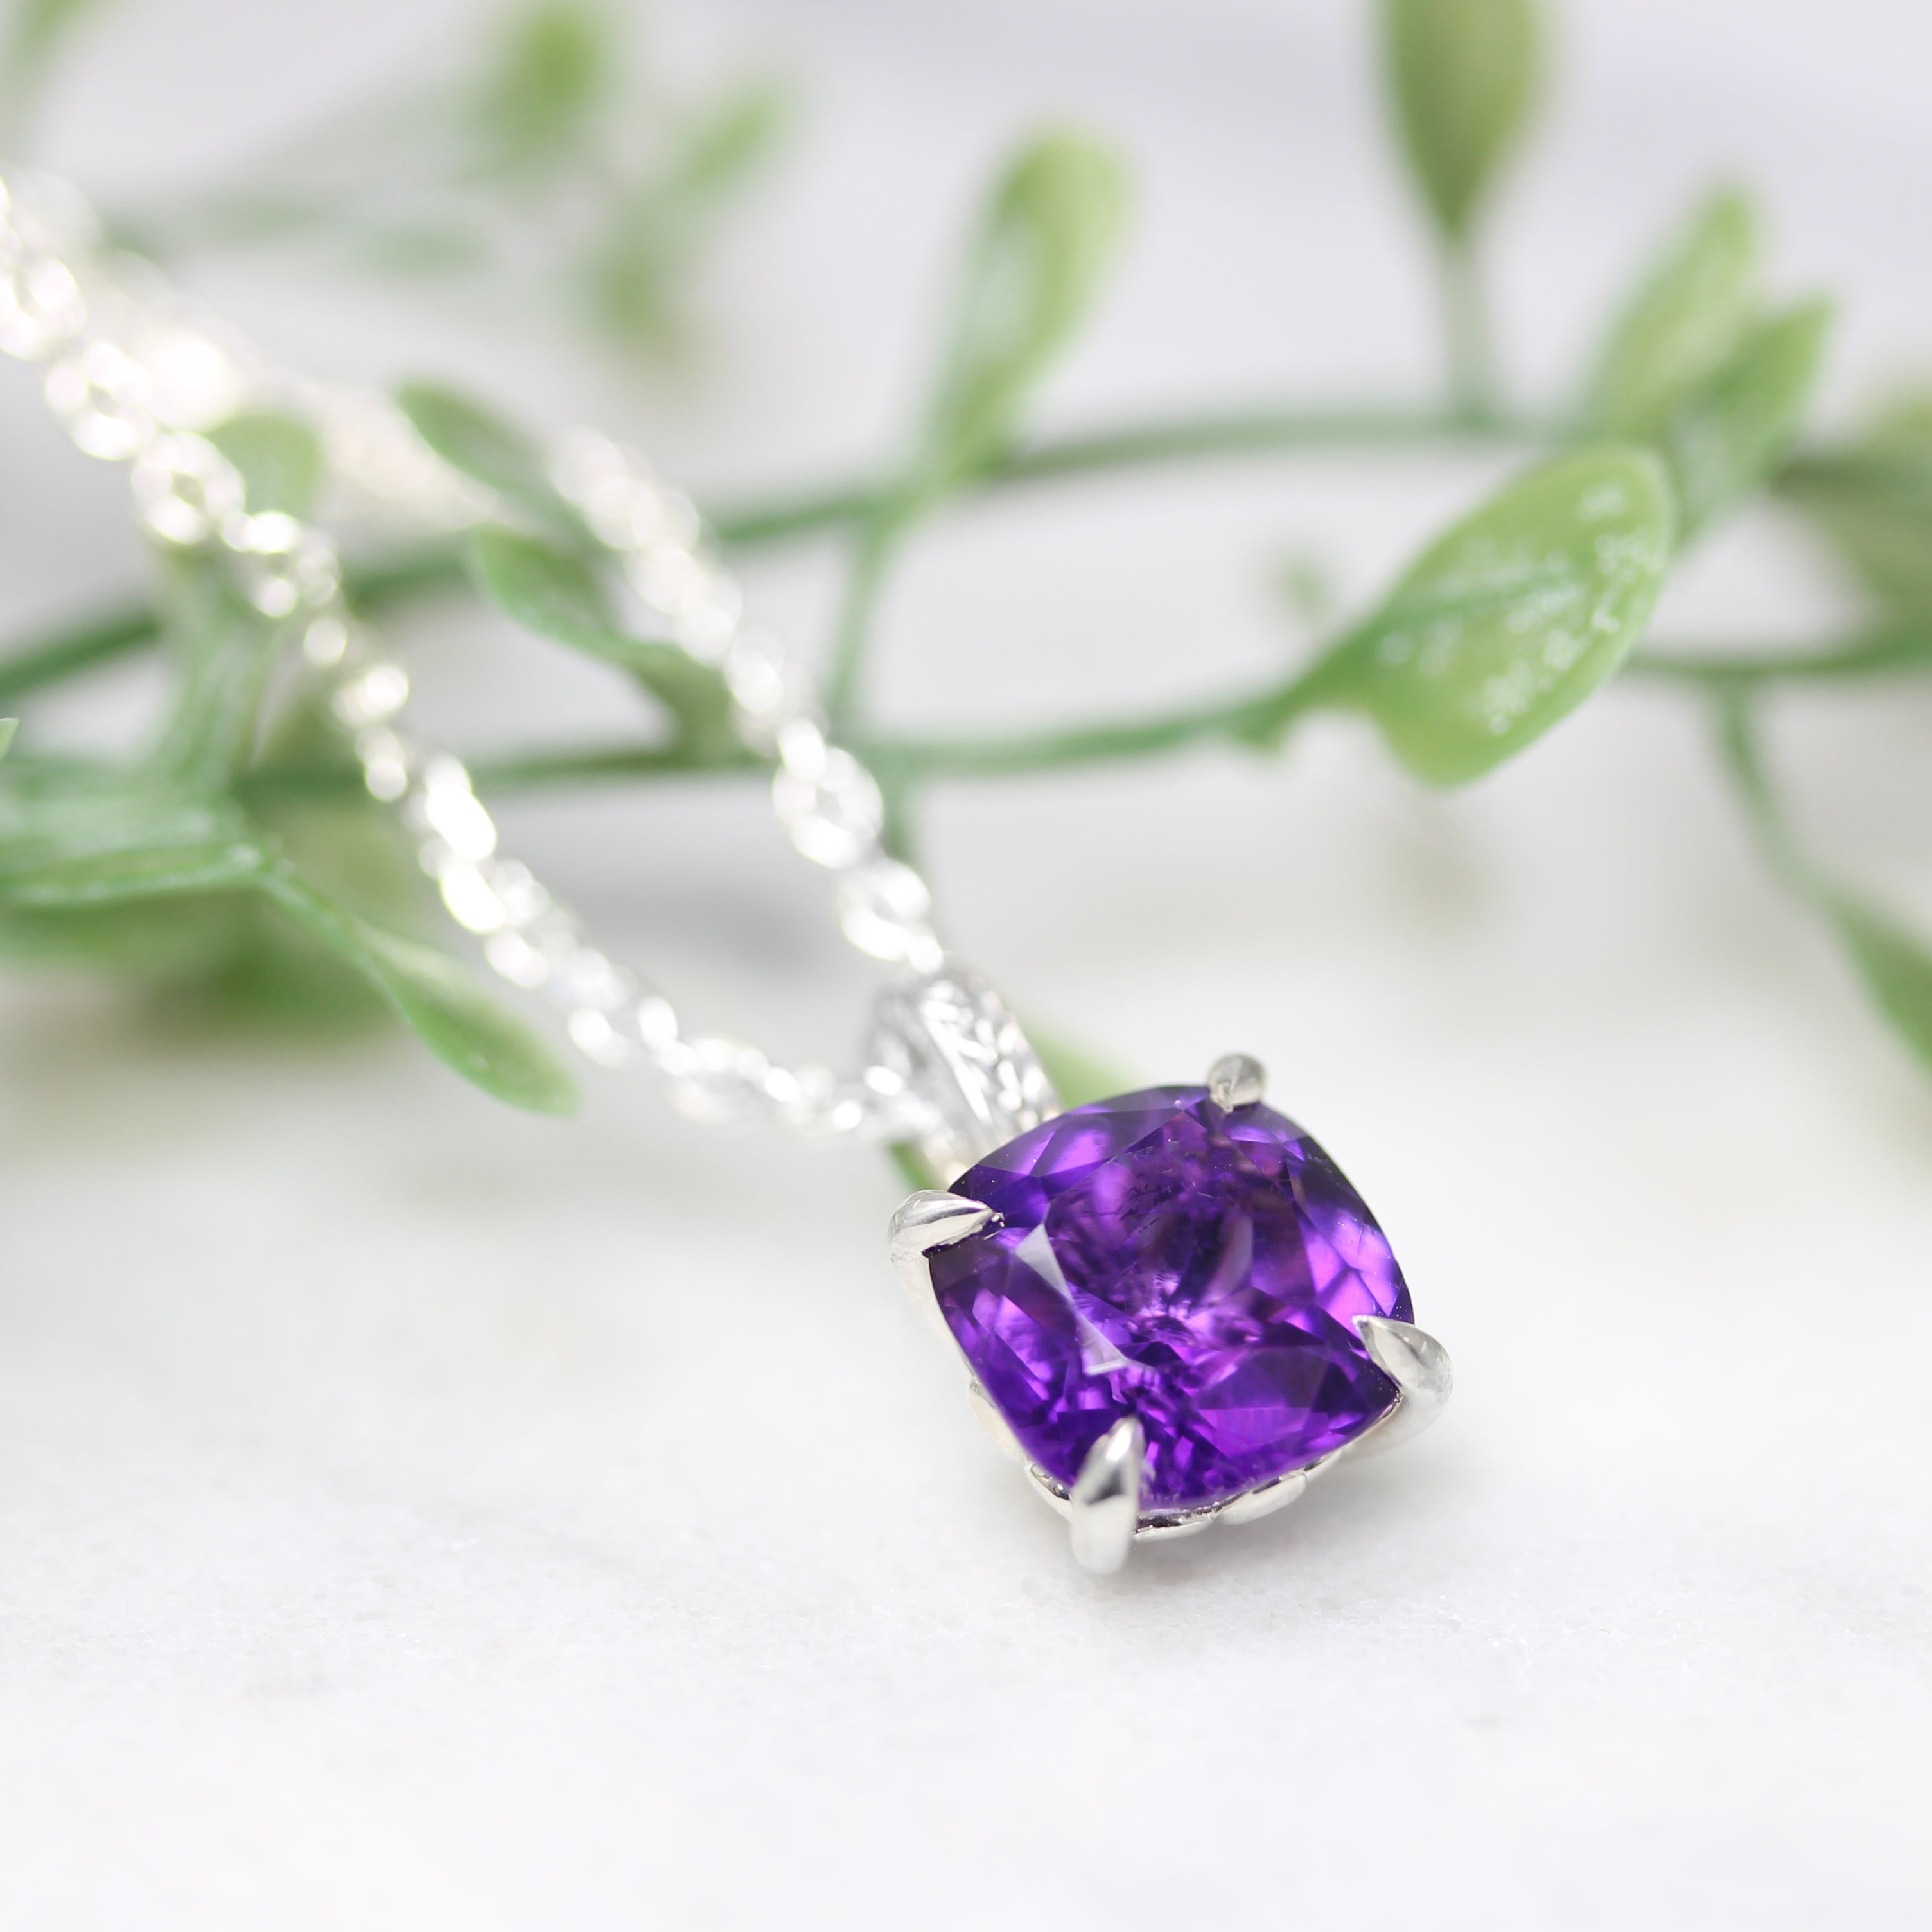 amethyst silver pendant angled view with greenery